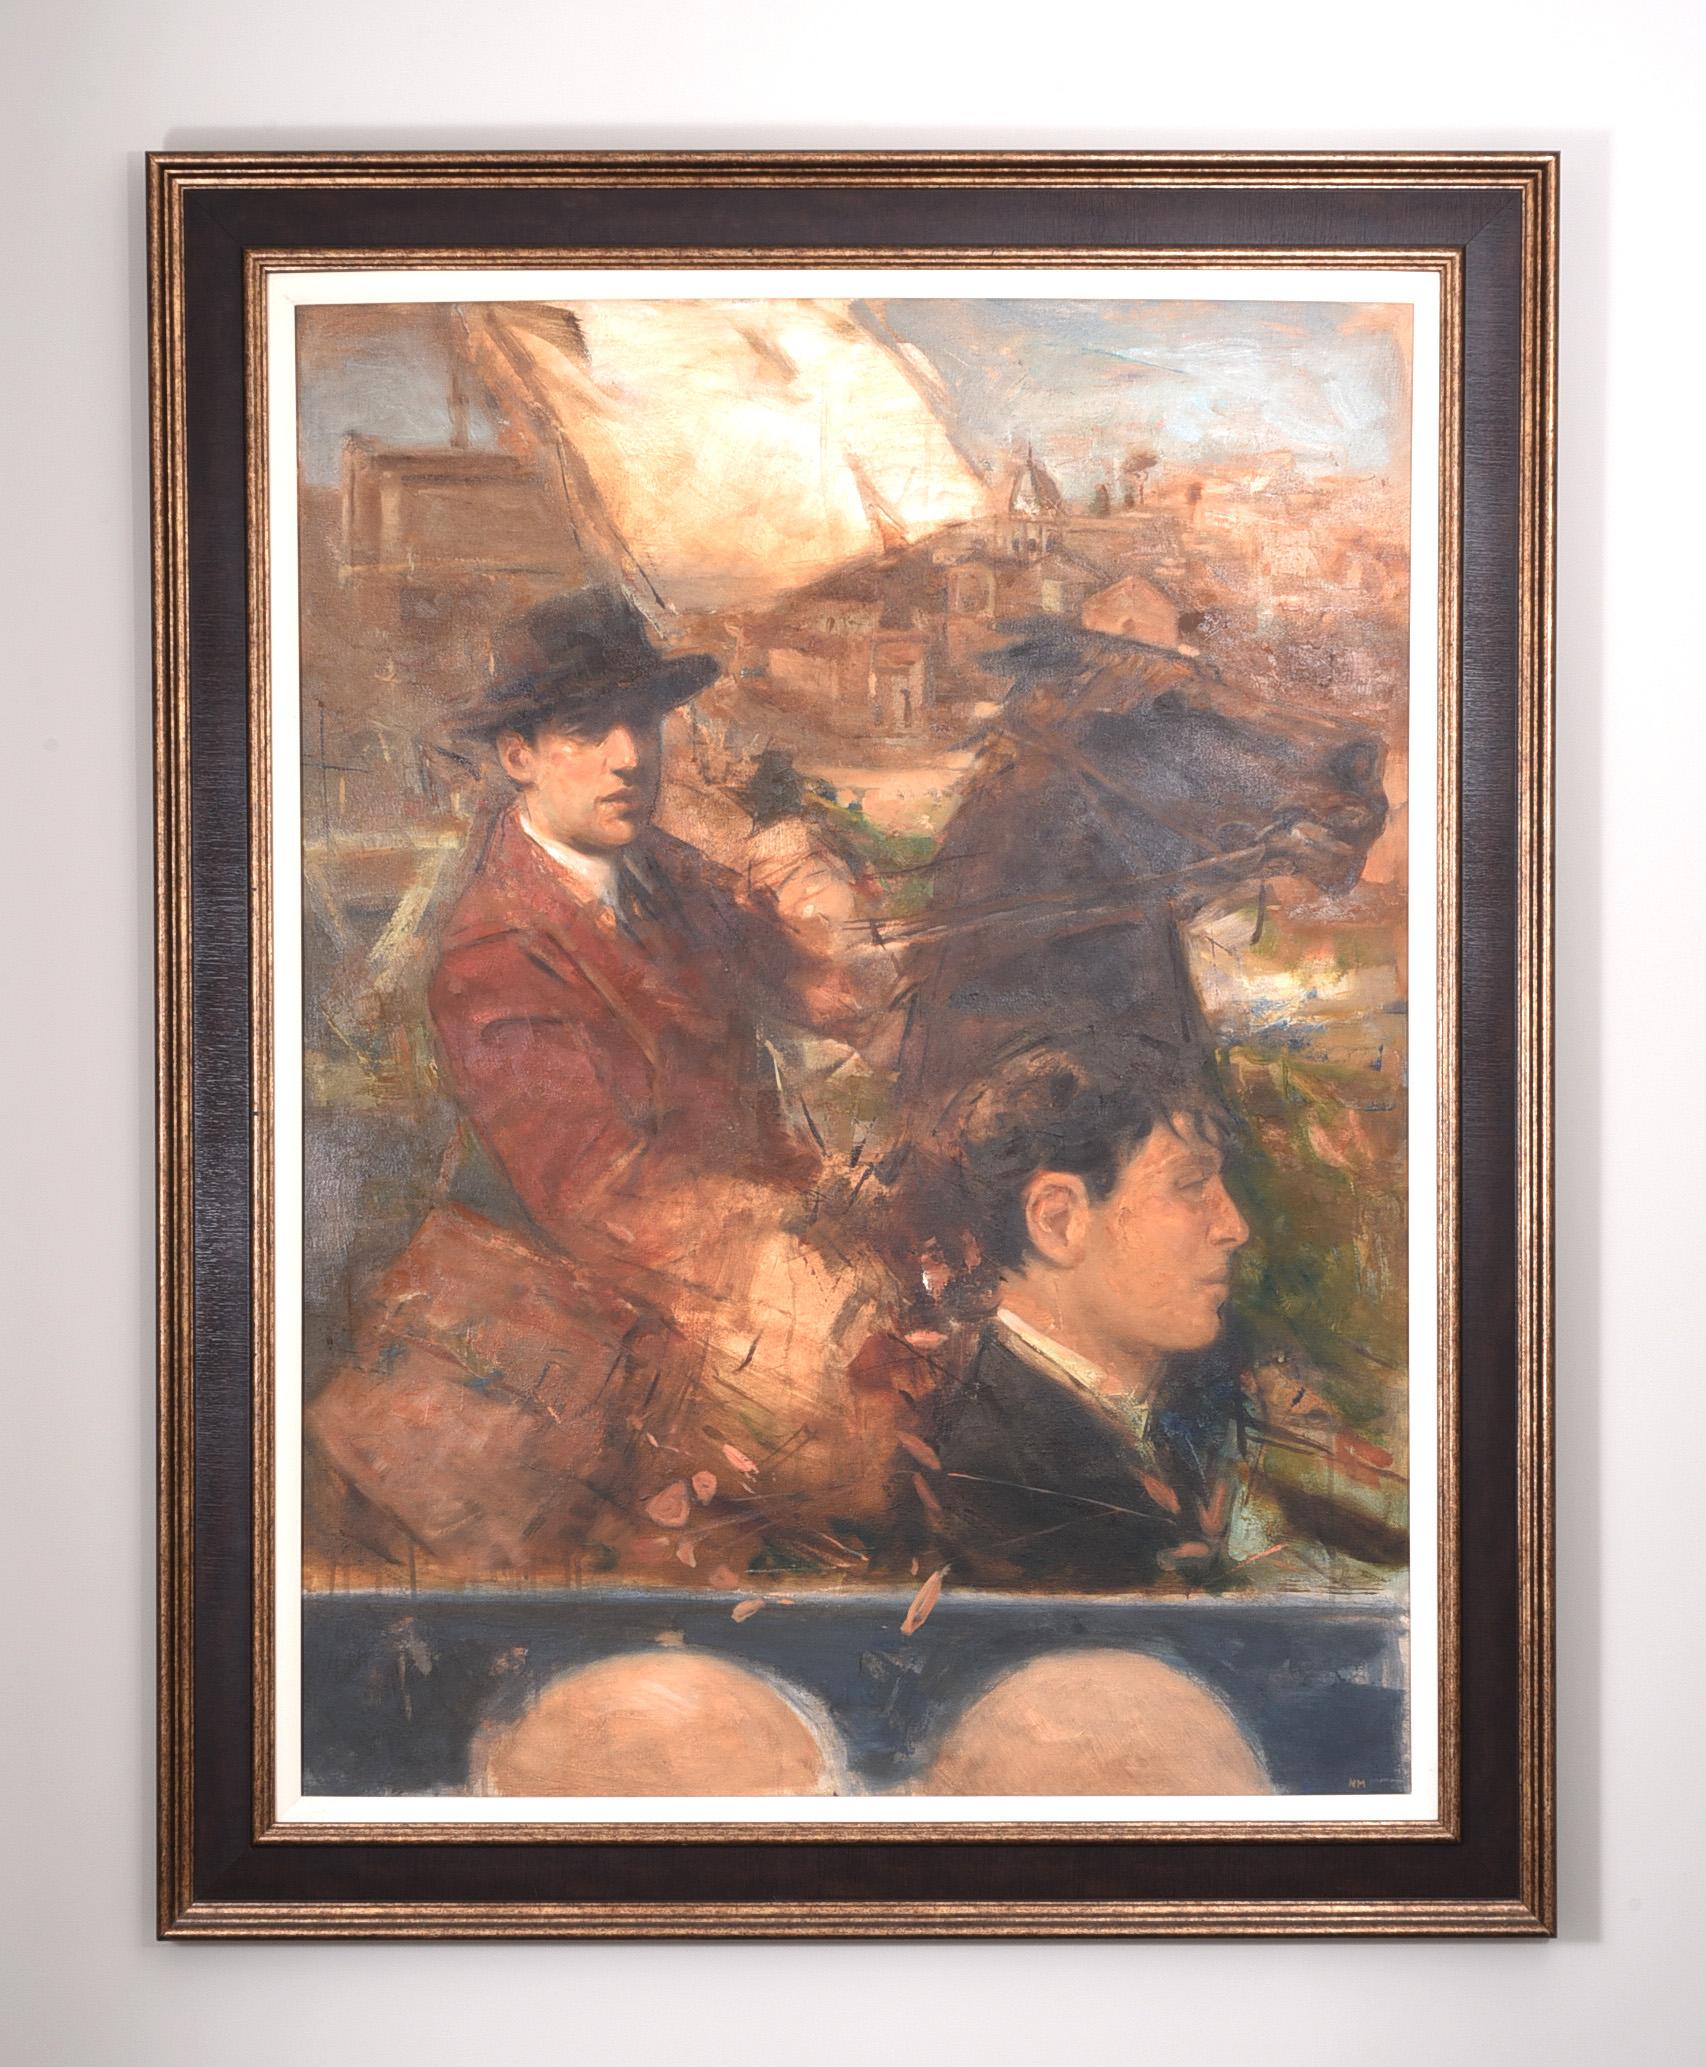 Oil on canvas
Signed in Mono
Framed
Measure: 40 x 30 inches (47 x 37 inches framed)

W.B Yeats depicted in the foreground of the picture. 

The Easter Rising also known as the Easter Rebellion, was an armed insurrection in Ireland during Easter